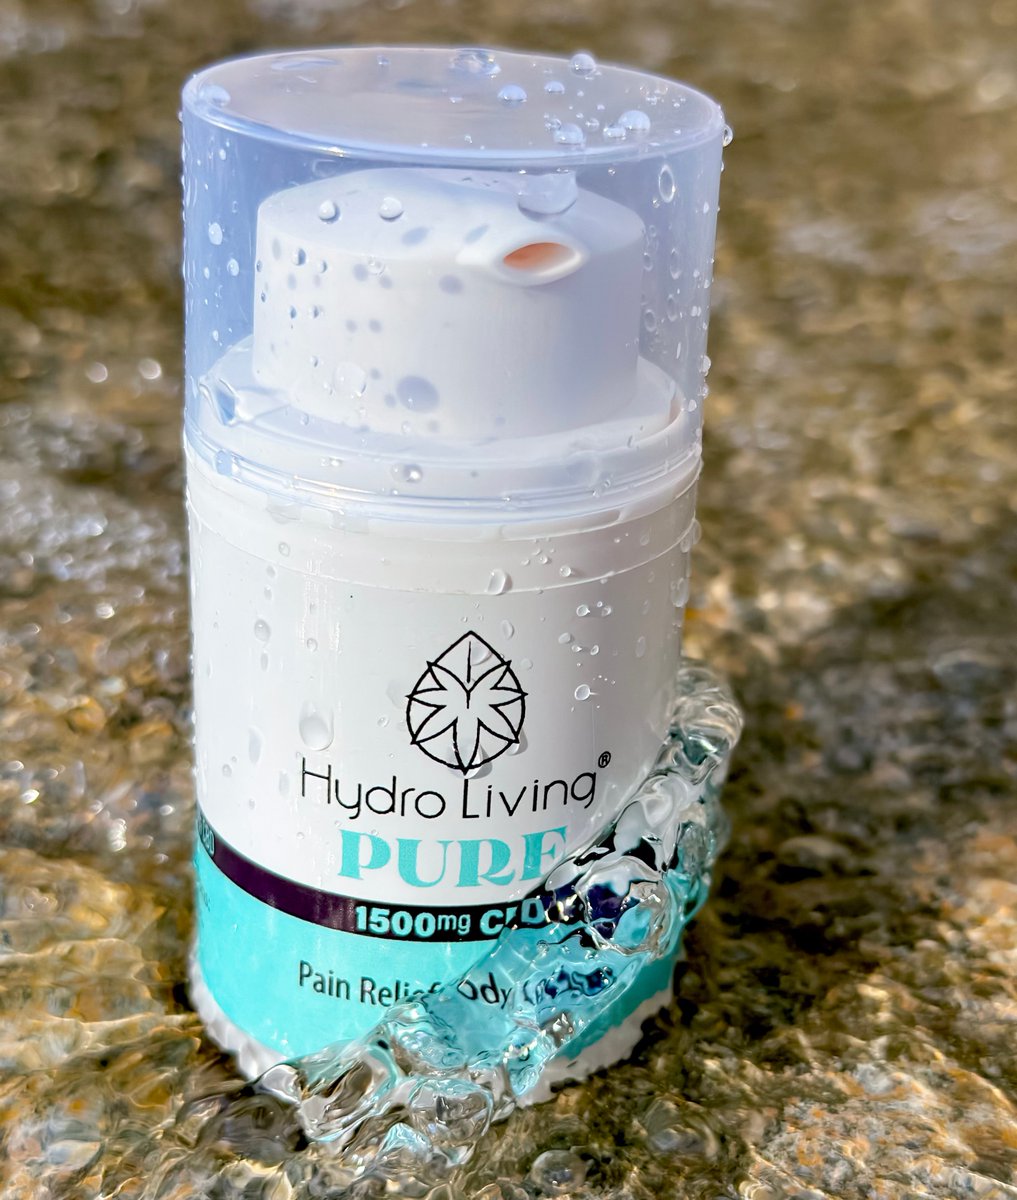 Pain-free purity! 💧 How do YOU live that Hydro-Life? 😎
👉hydroliving.com

#painfree #cbdoil #hydroliving #livethathydrolife #allnatural